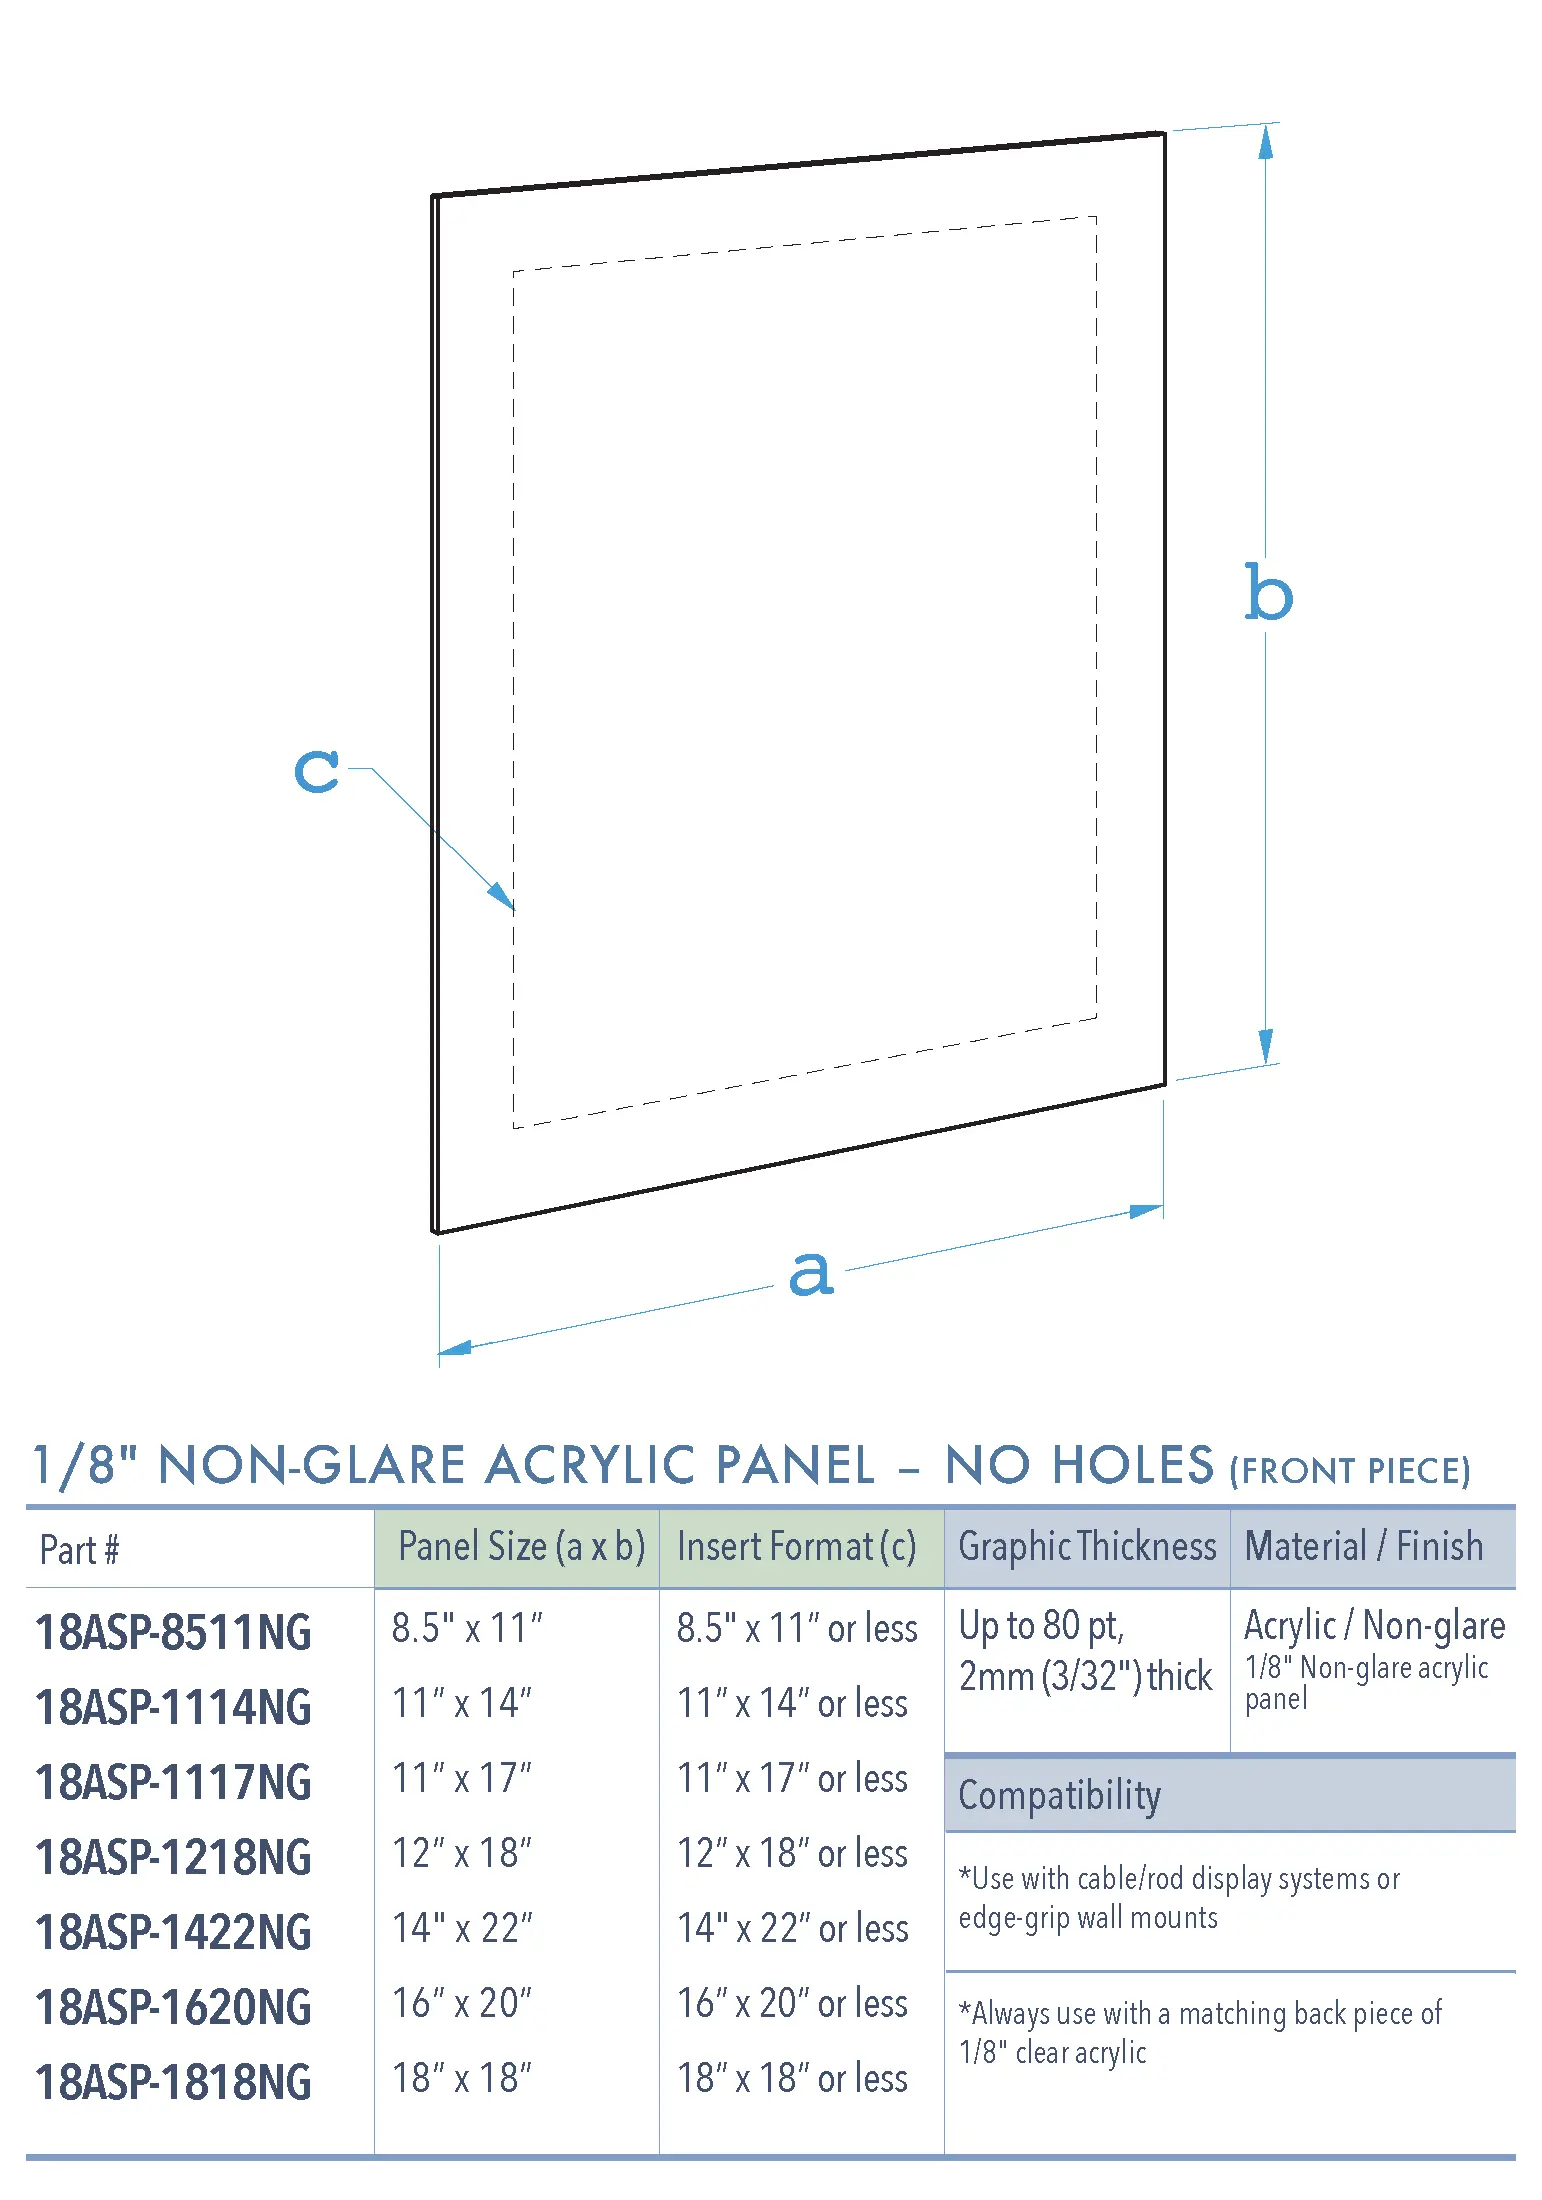 Specifications for 18ASP-PANEL-NG-MD